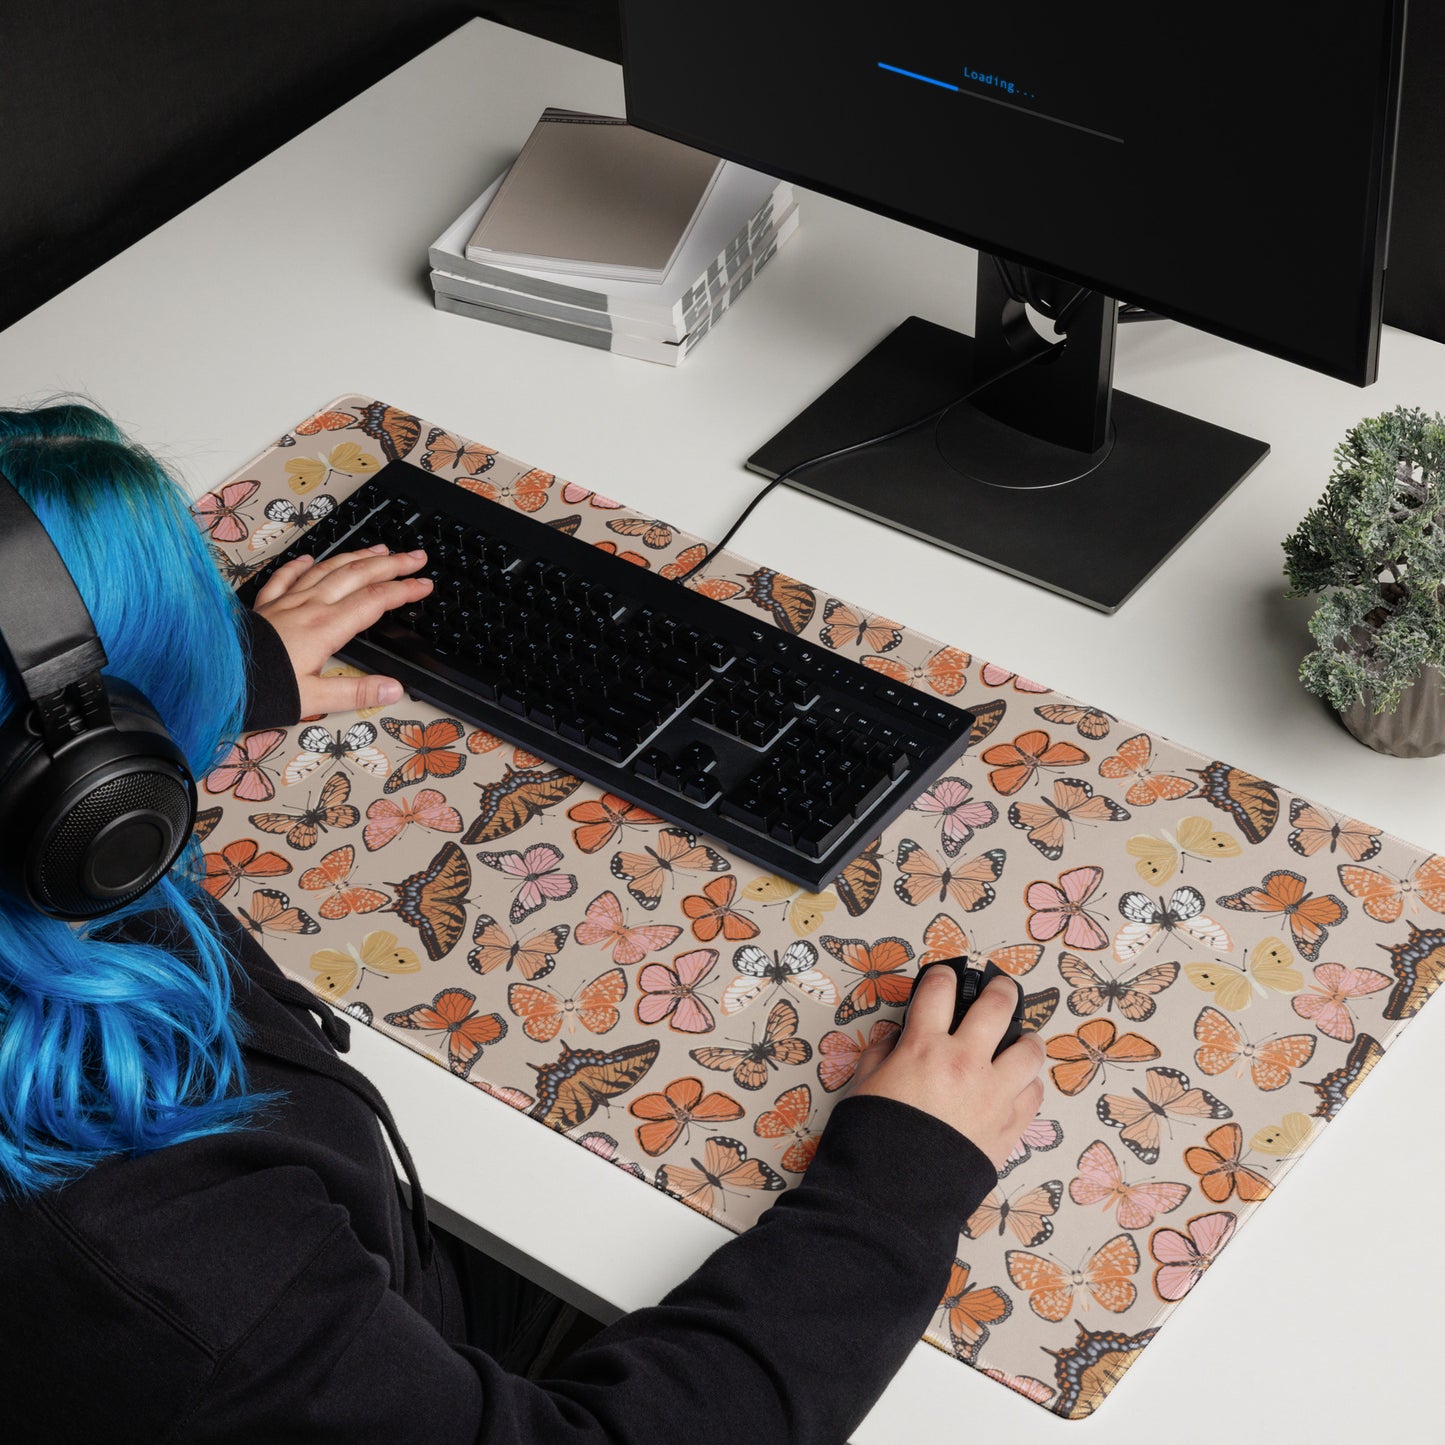 Swallowtails Gaming mouse pad